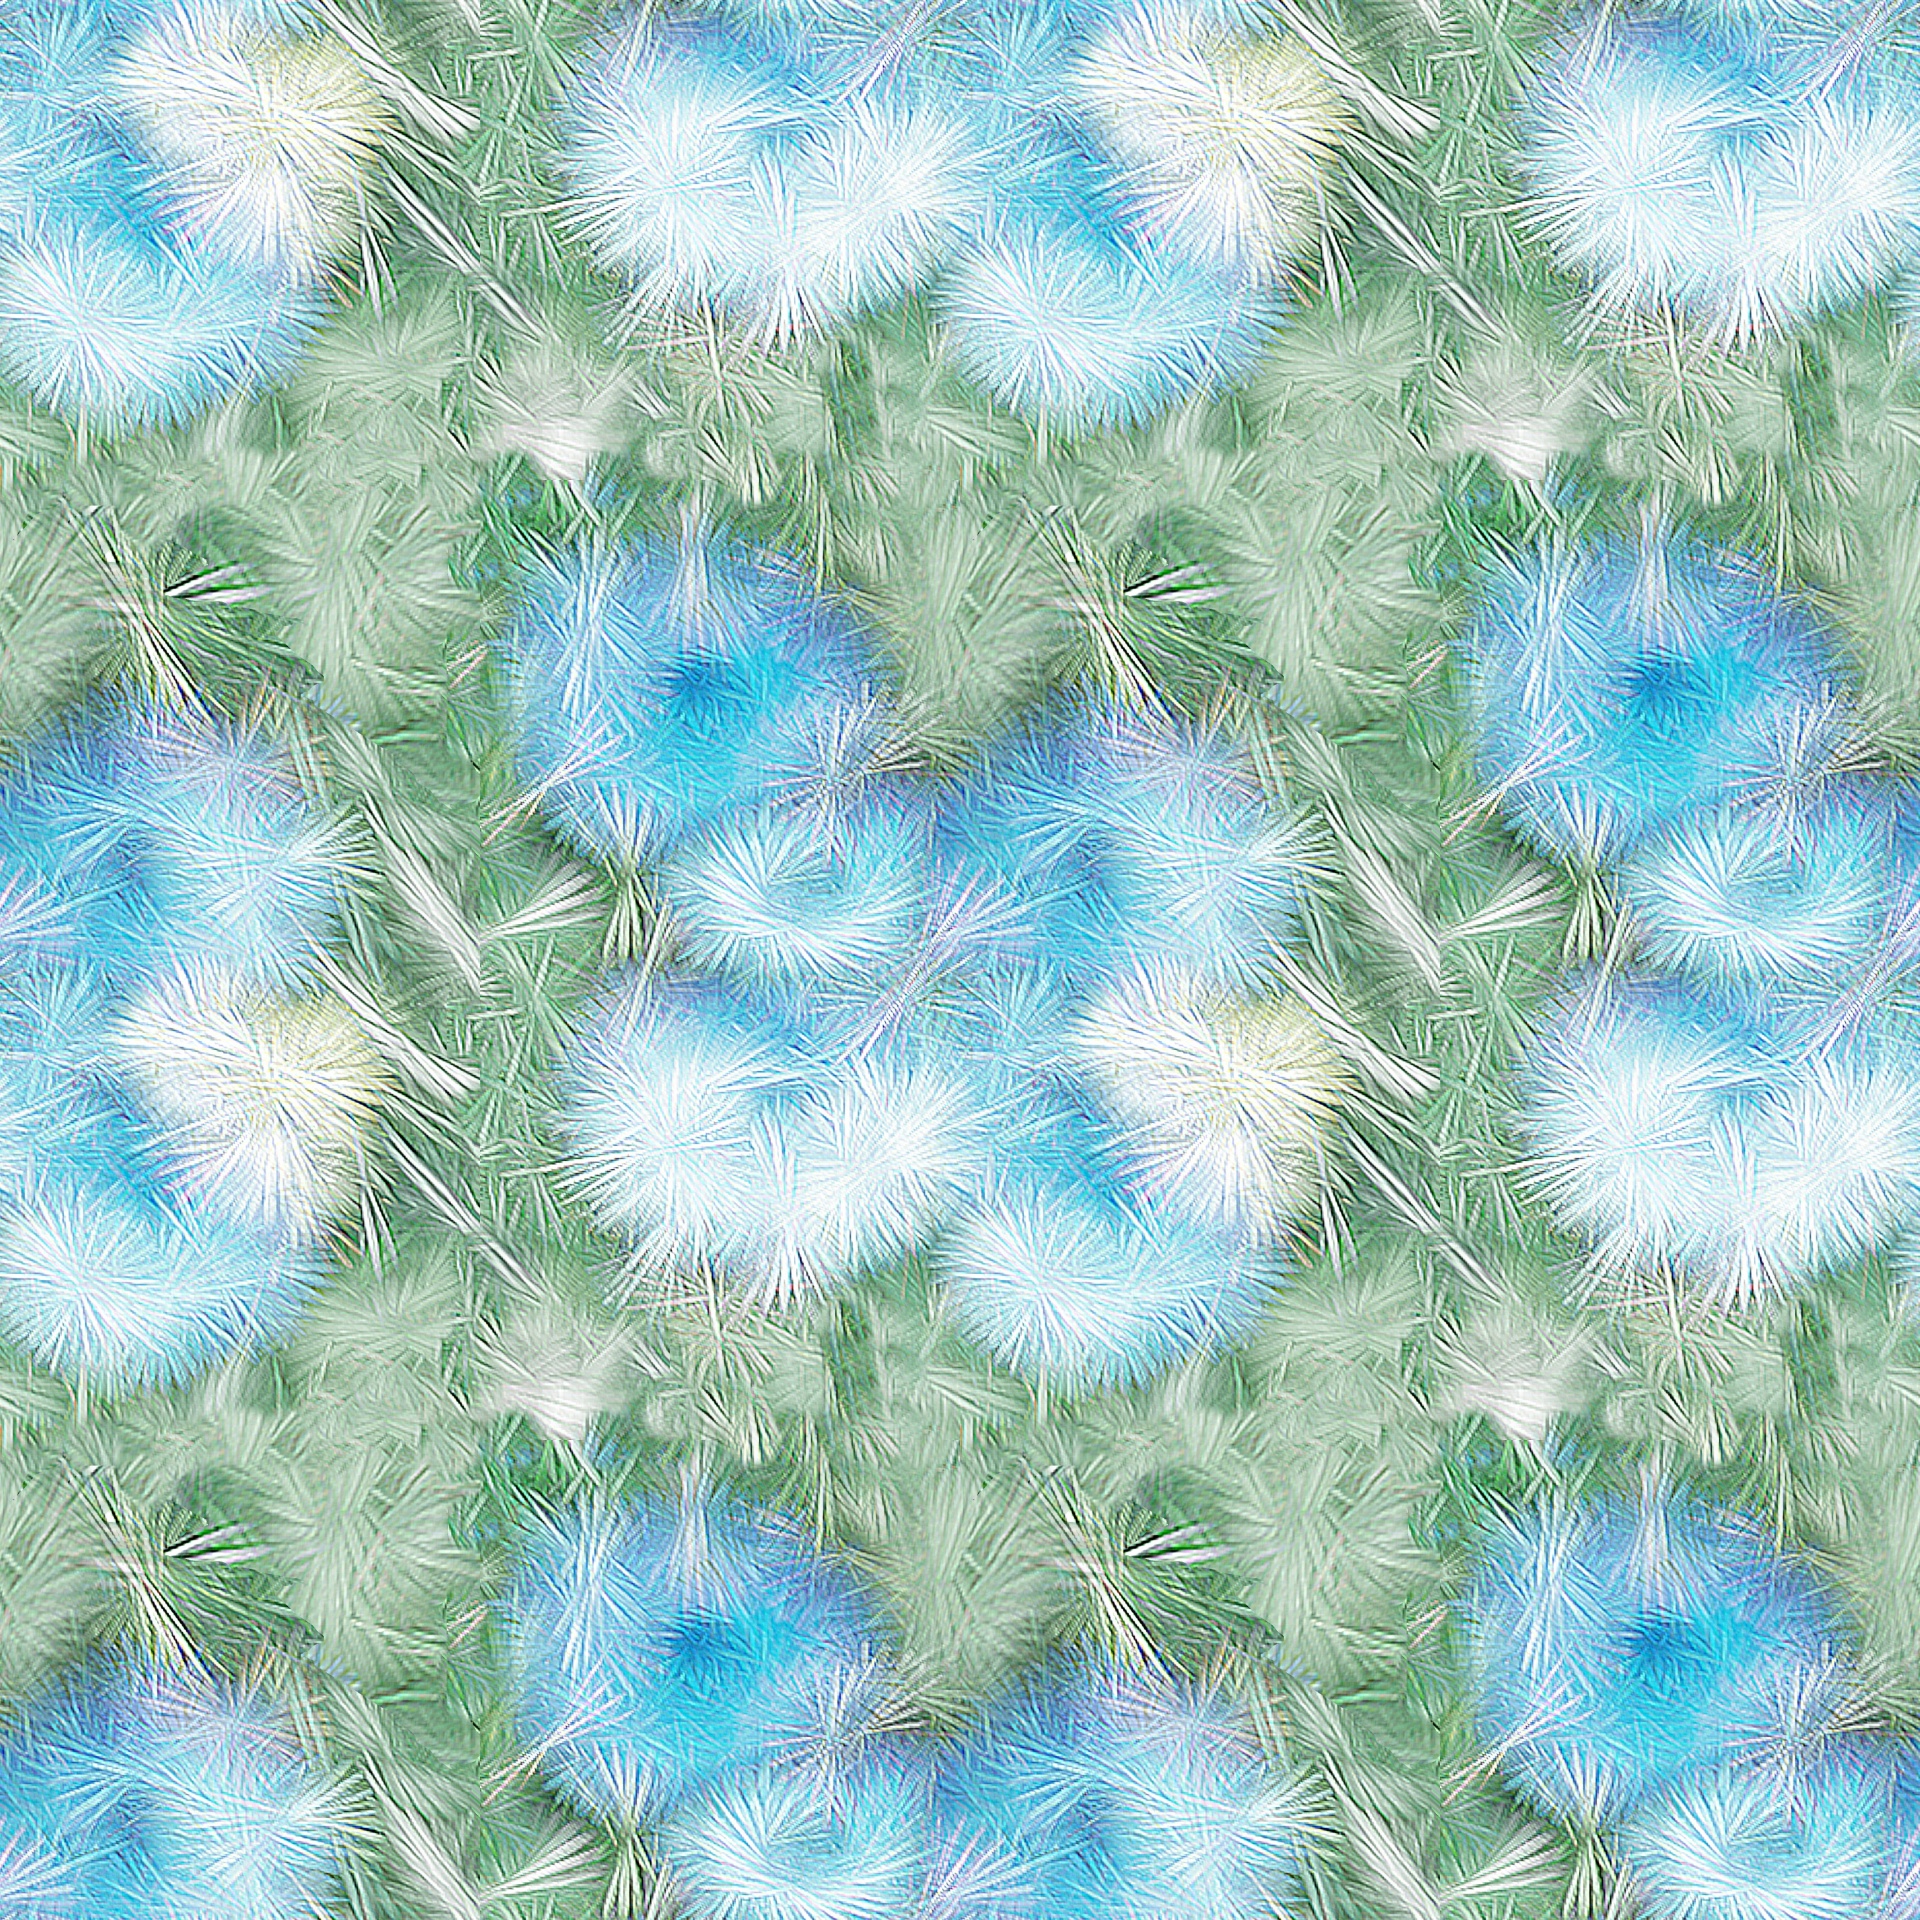 Pale Abstract Flower Repeat Tile